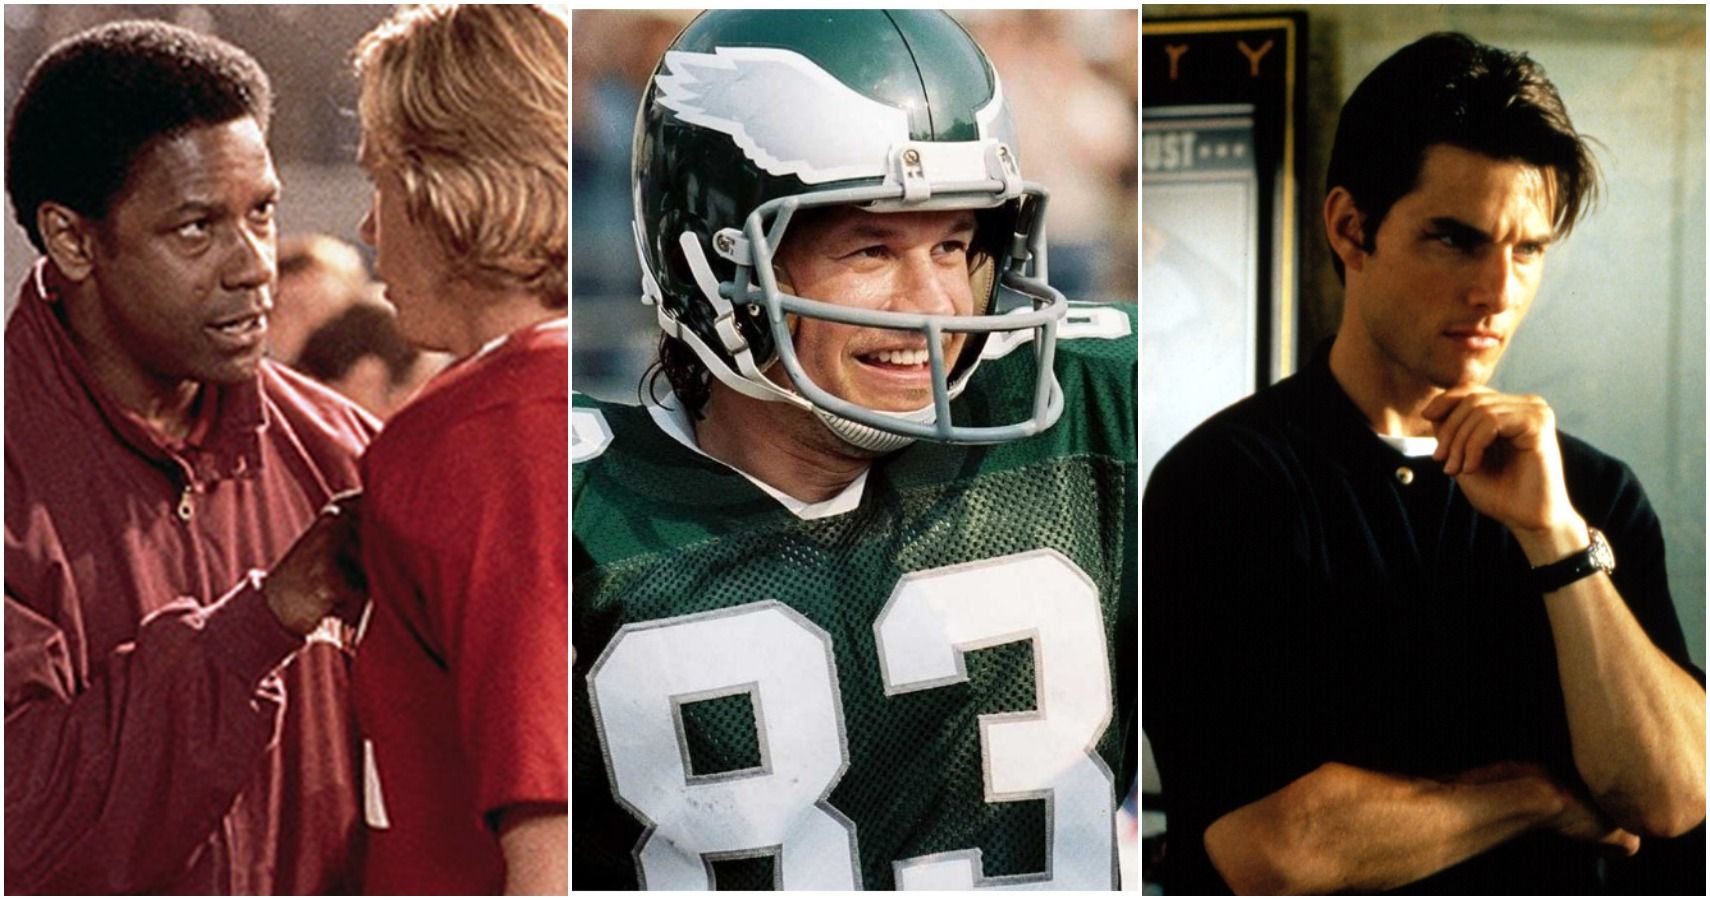 The 10 Best Football Movies Ever Made, According to Rotten Tomatoes